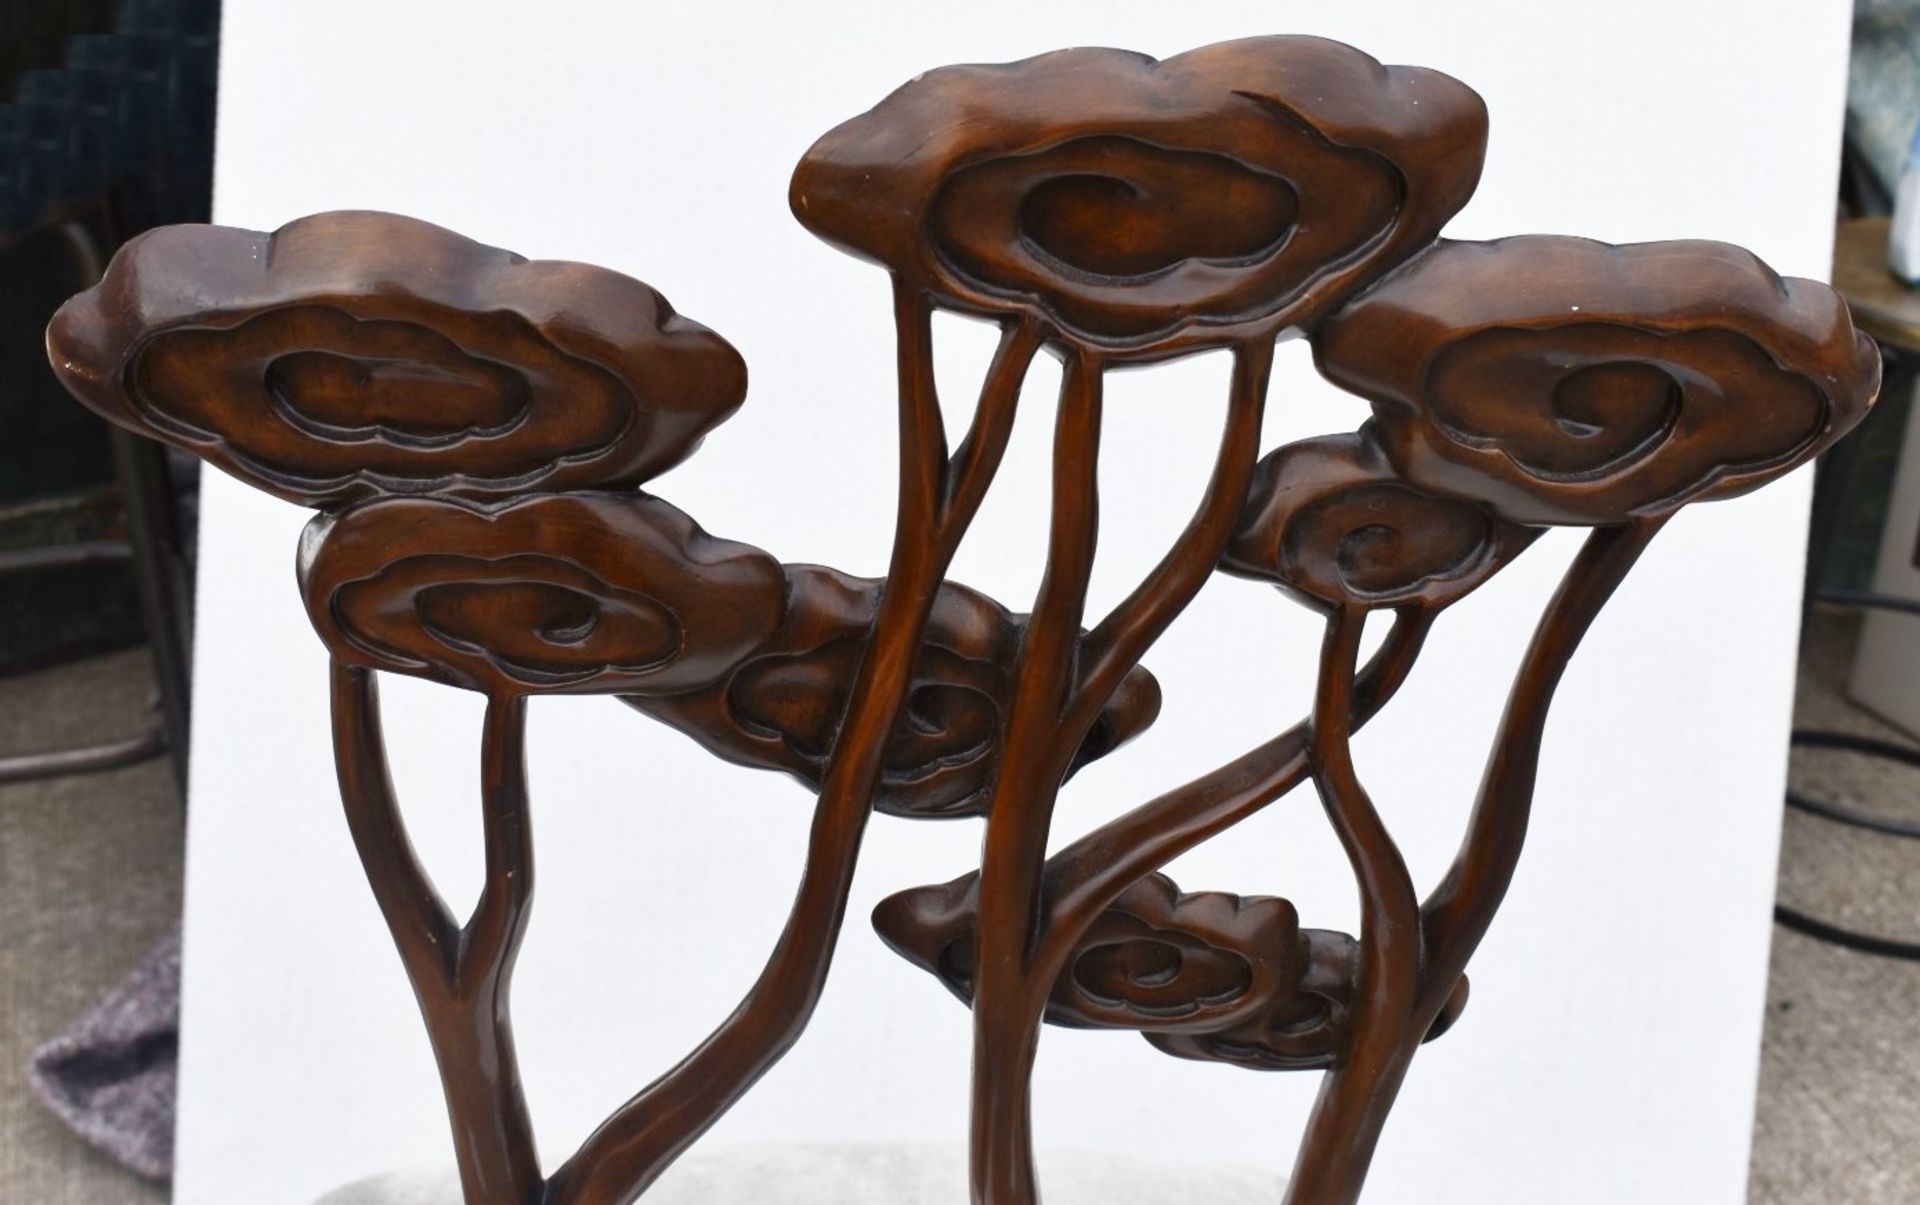 1 x CHRISTOPHER GUY 'Le Jardin' Luxury Hand-carved Solid Mahogany Designer Dining Chair - Recently - Image 7 of 14